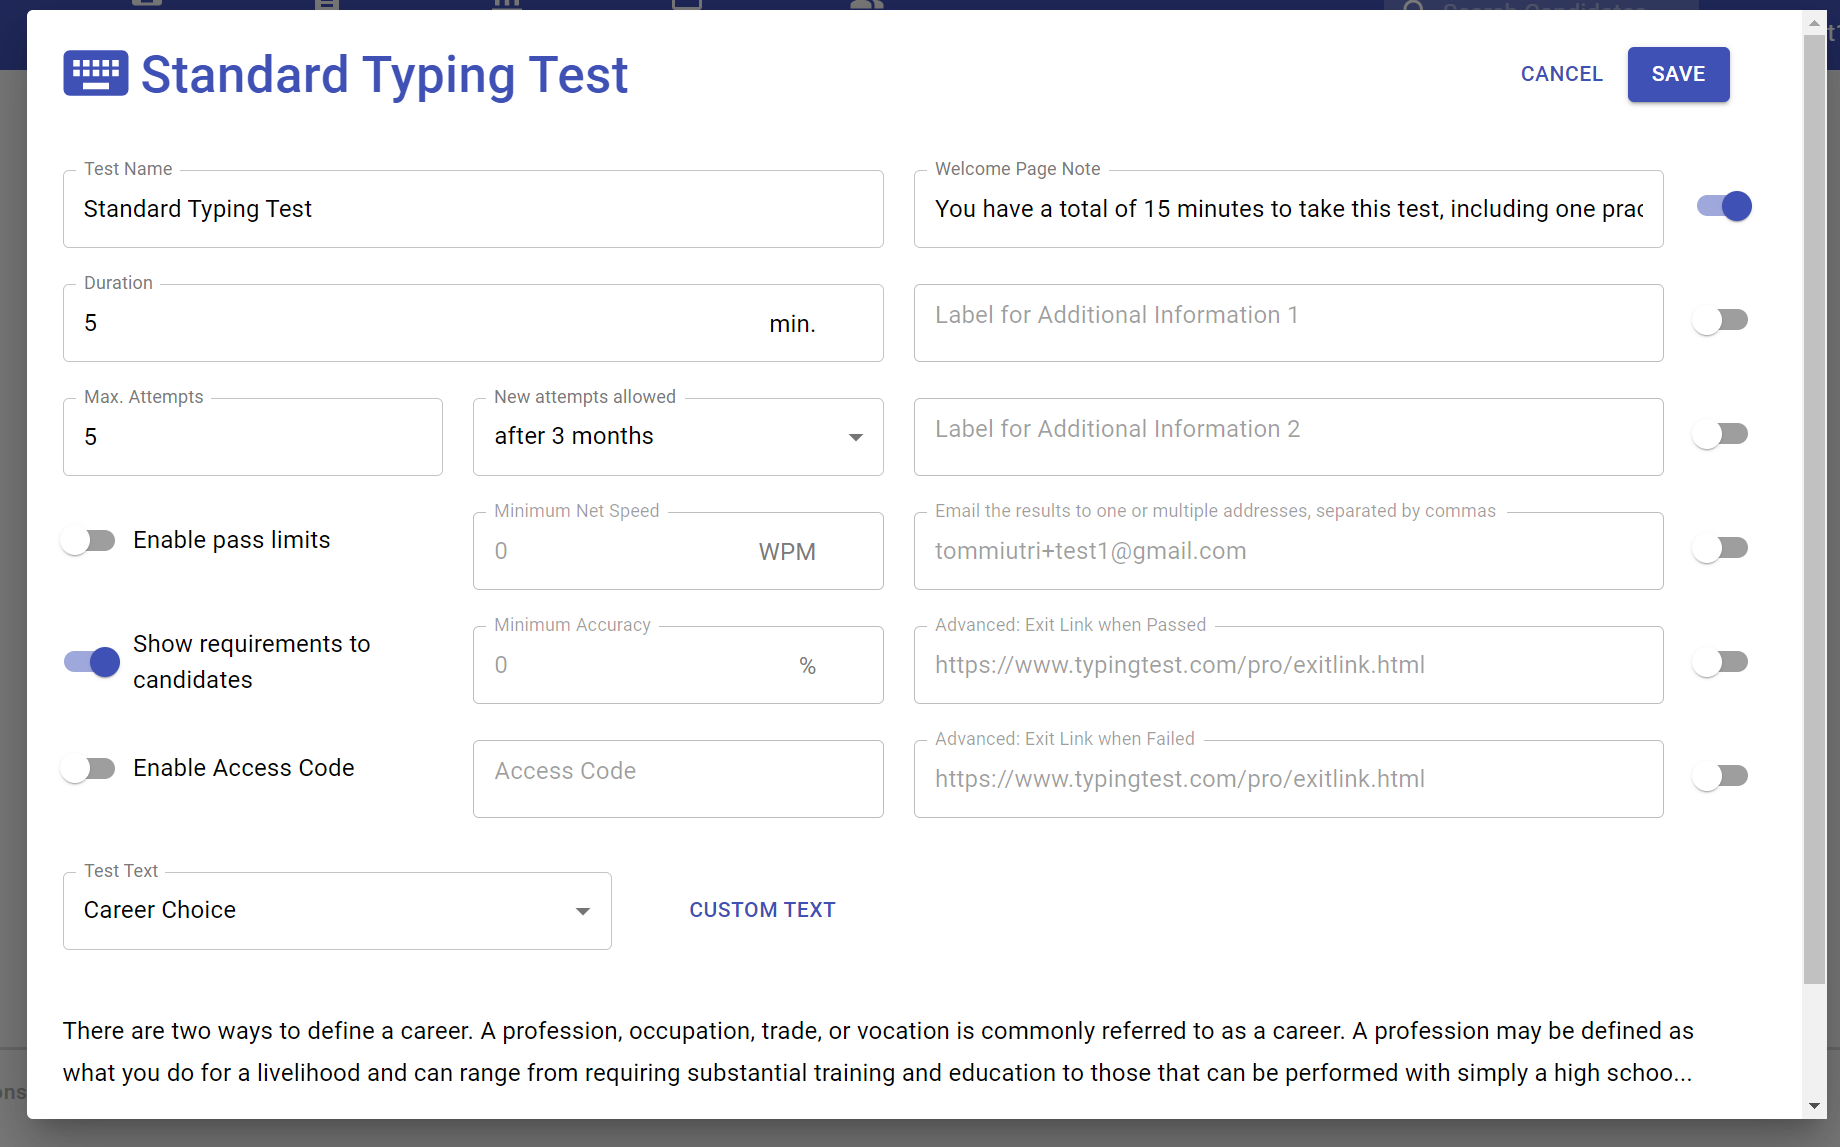 Configuring Typingtest Pro To Hide Passfail Status For Test Takers Typingtest Pro 8295